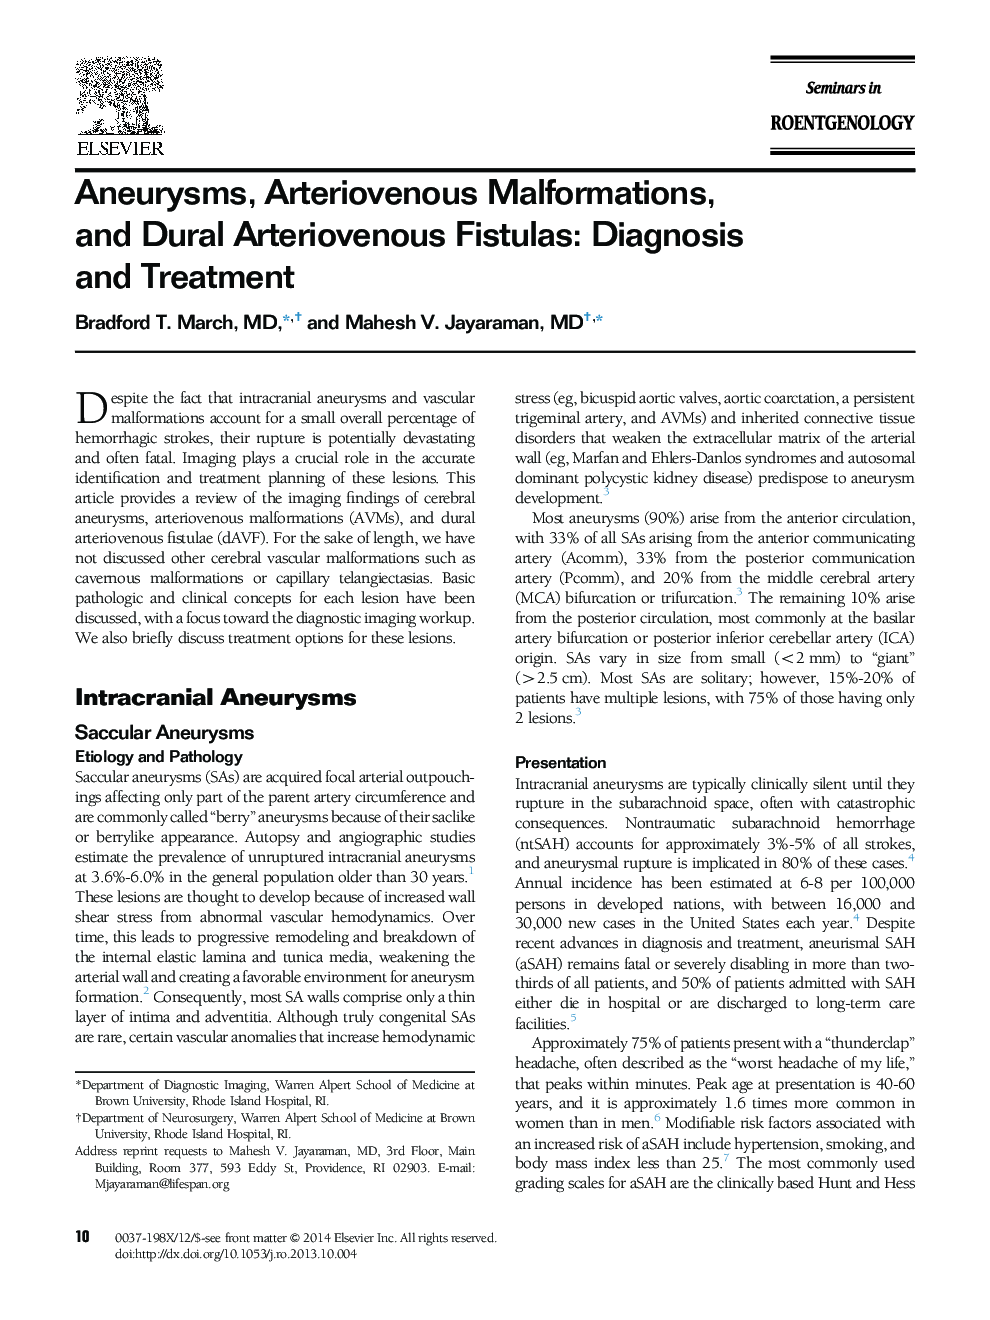 Aneurysms, Arteriovenous Malformations, and Dural Arteriovenous Fistulas: Diagnosis and Treatment